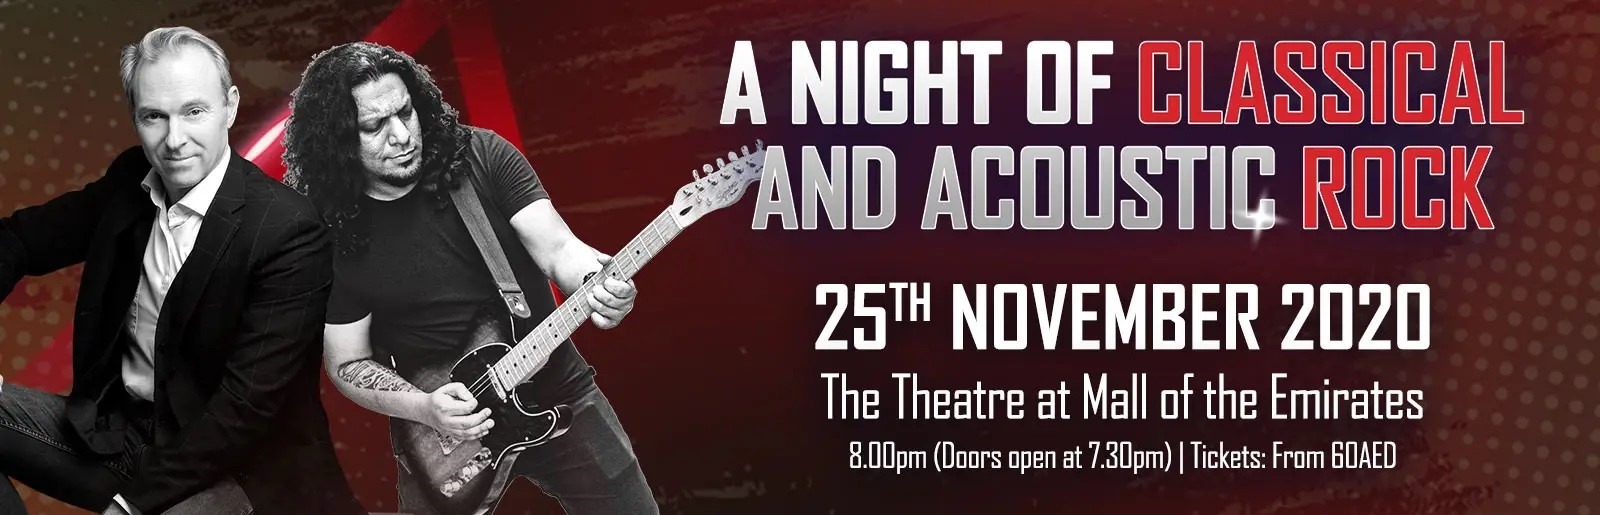 A Night of Classical and Acoustic Rock - Coming Soon in UAE